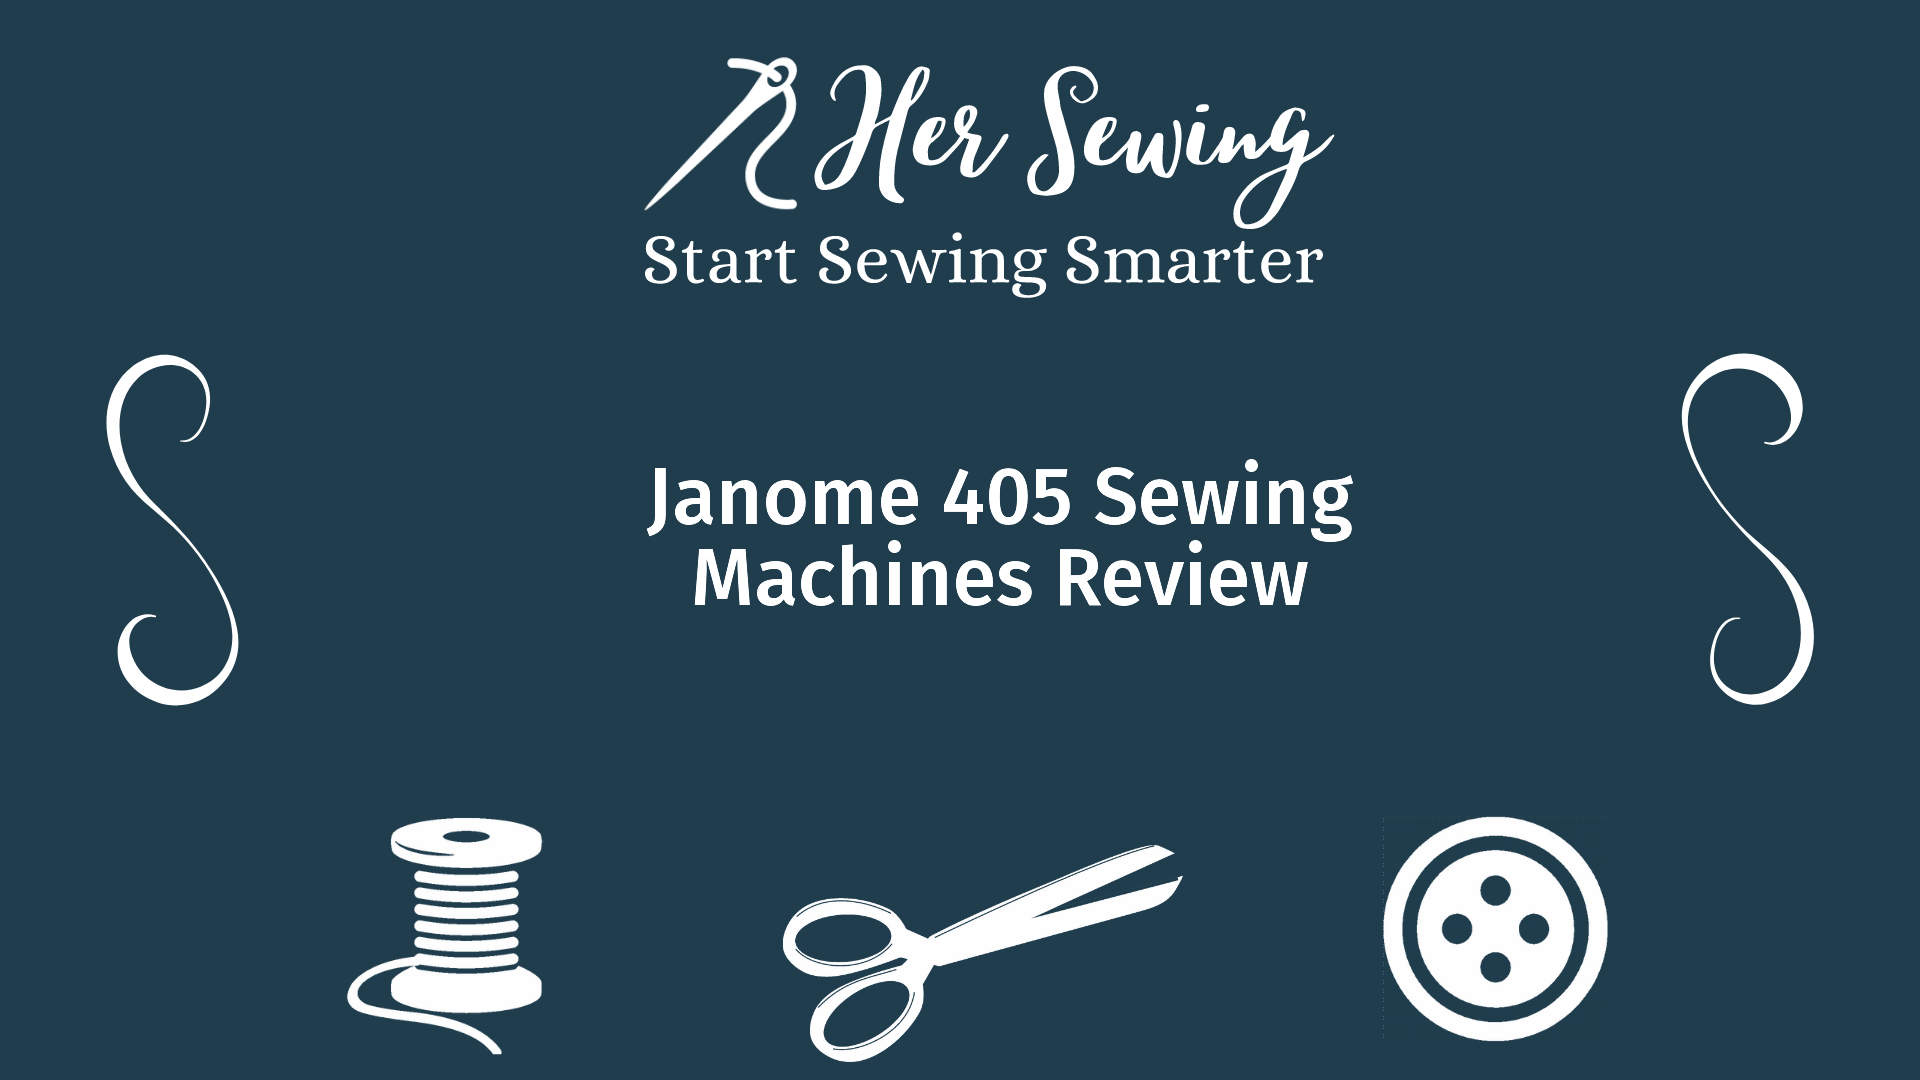 Janome 405 Sewing Machines Review